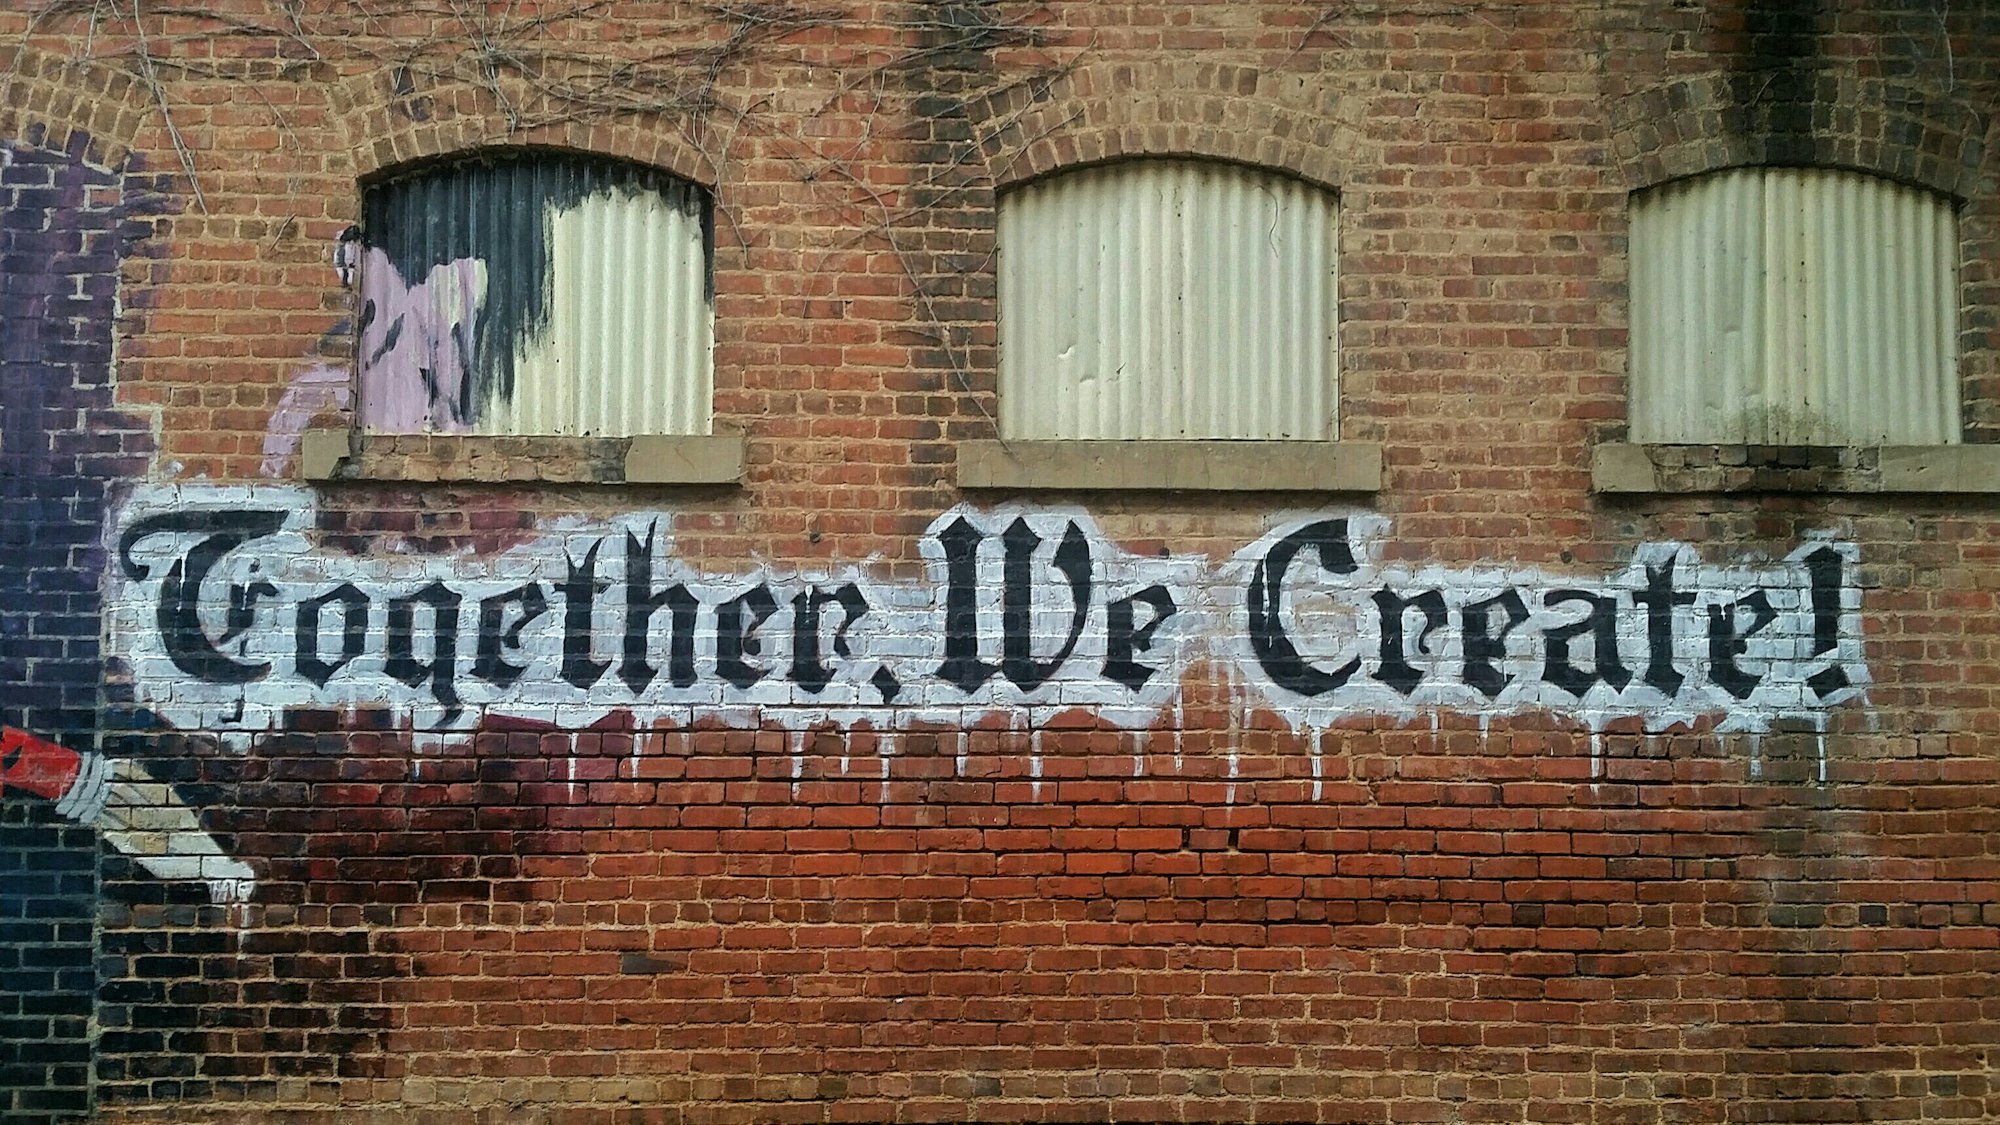 “Together, we create!” on brick wall